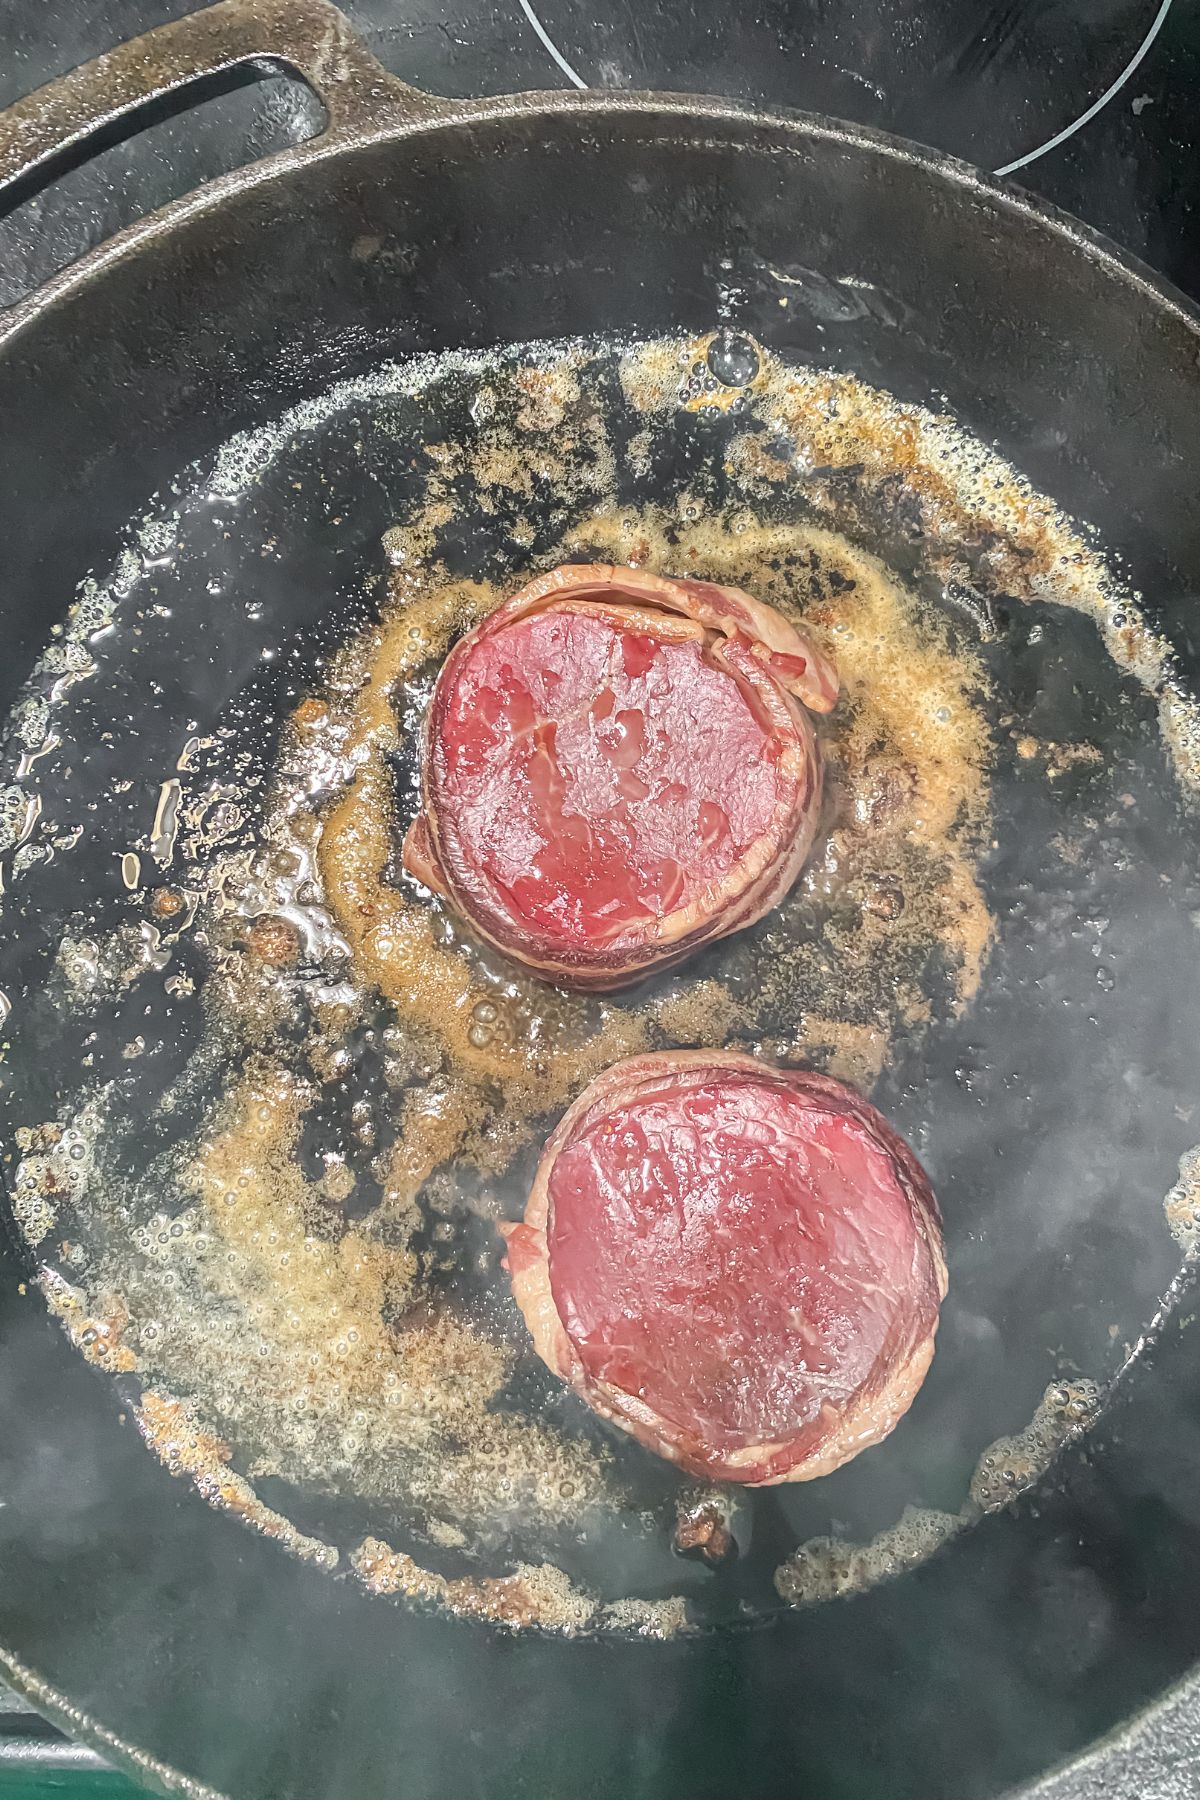 Two pieces of smoked bacon-wrapped chuck tender filets being cooked in a frying pan.